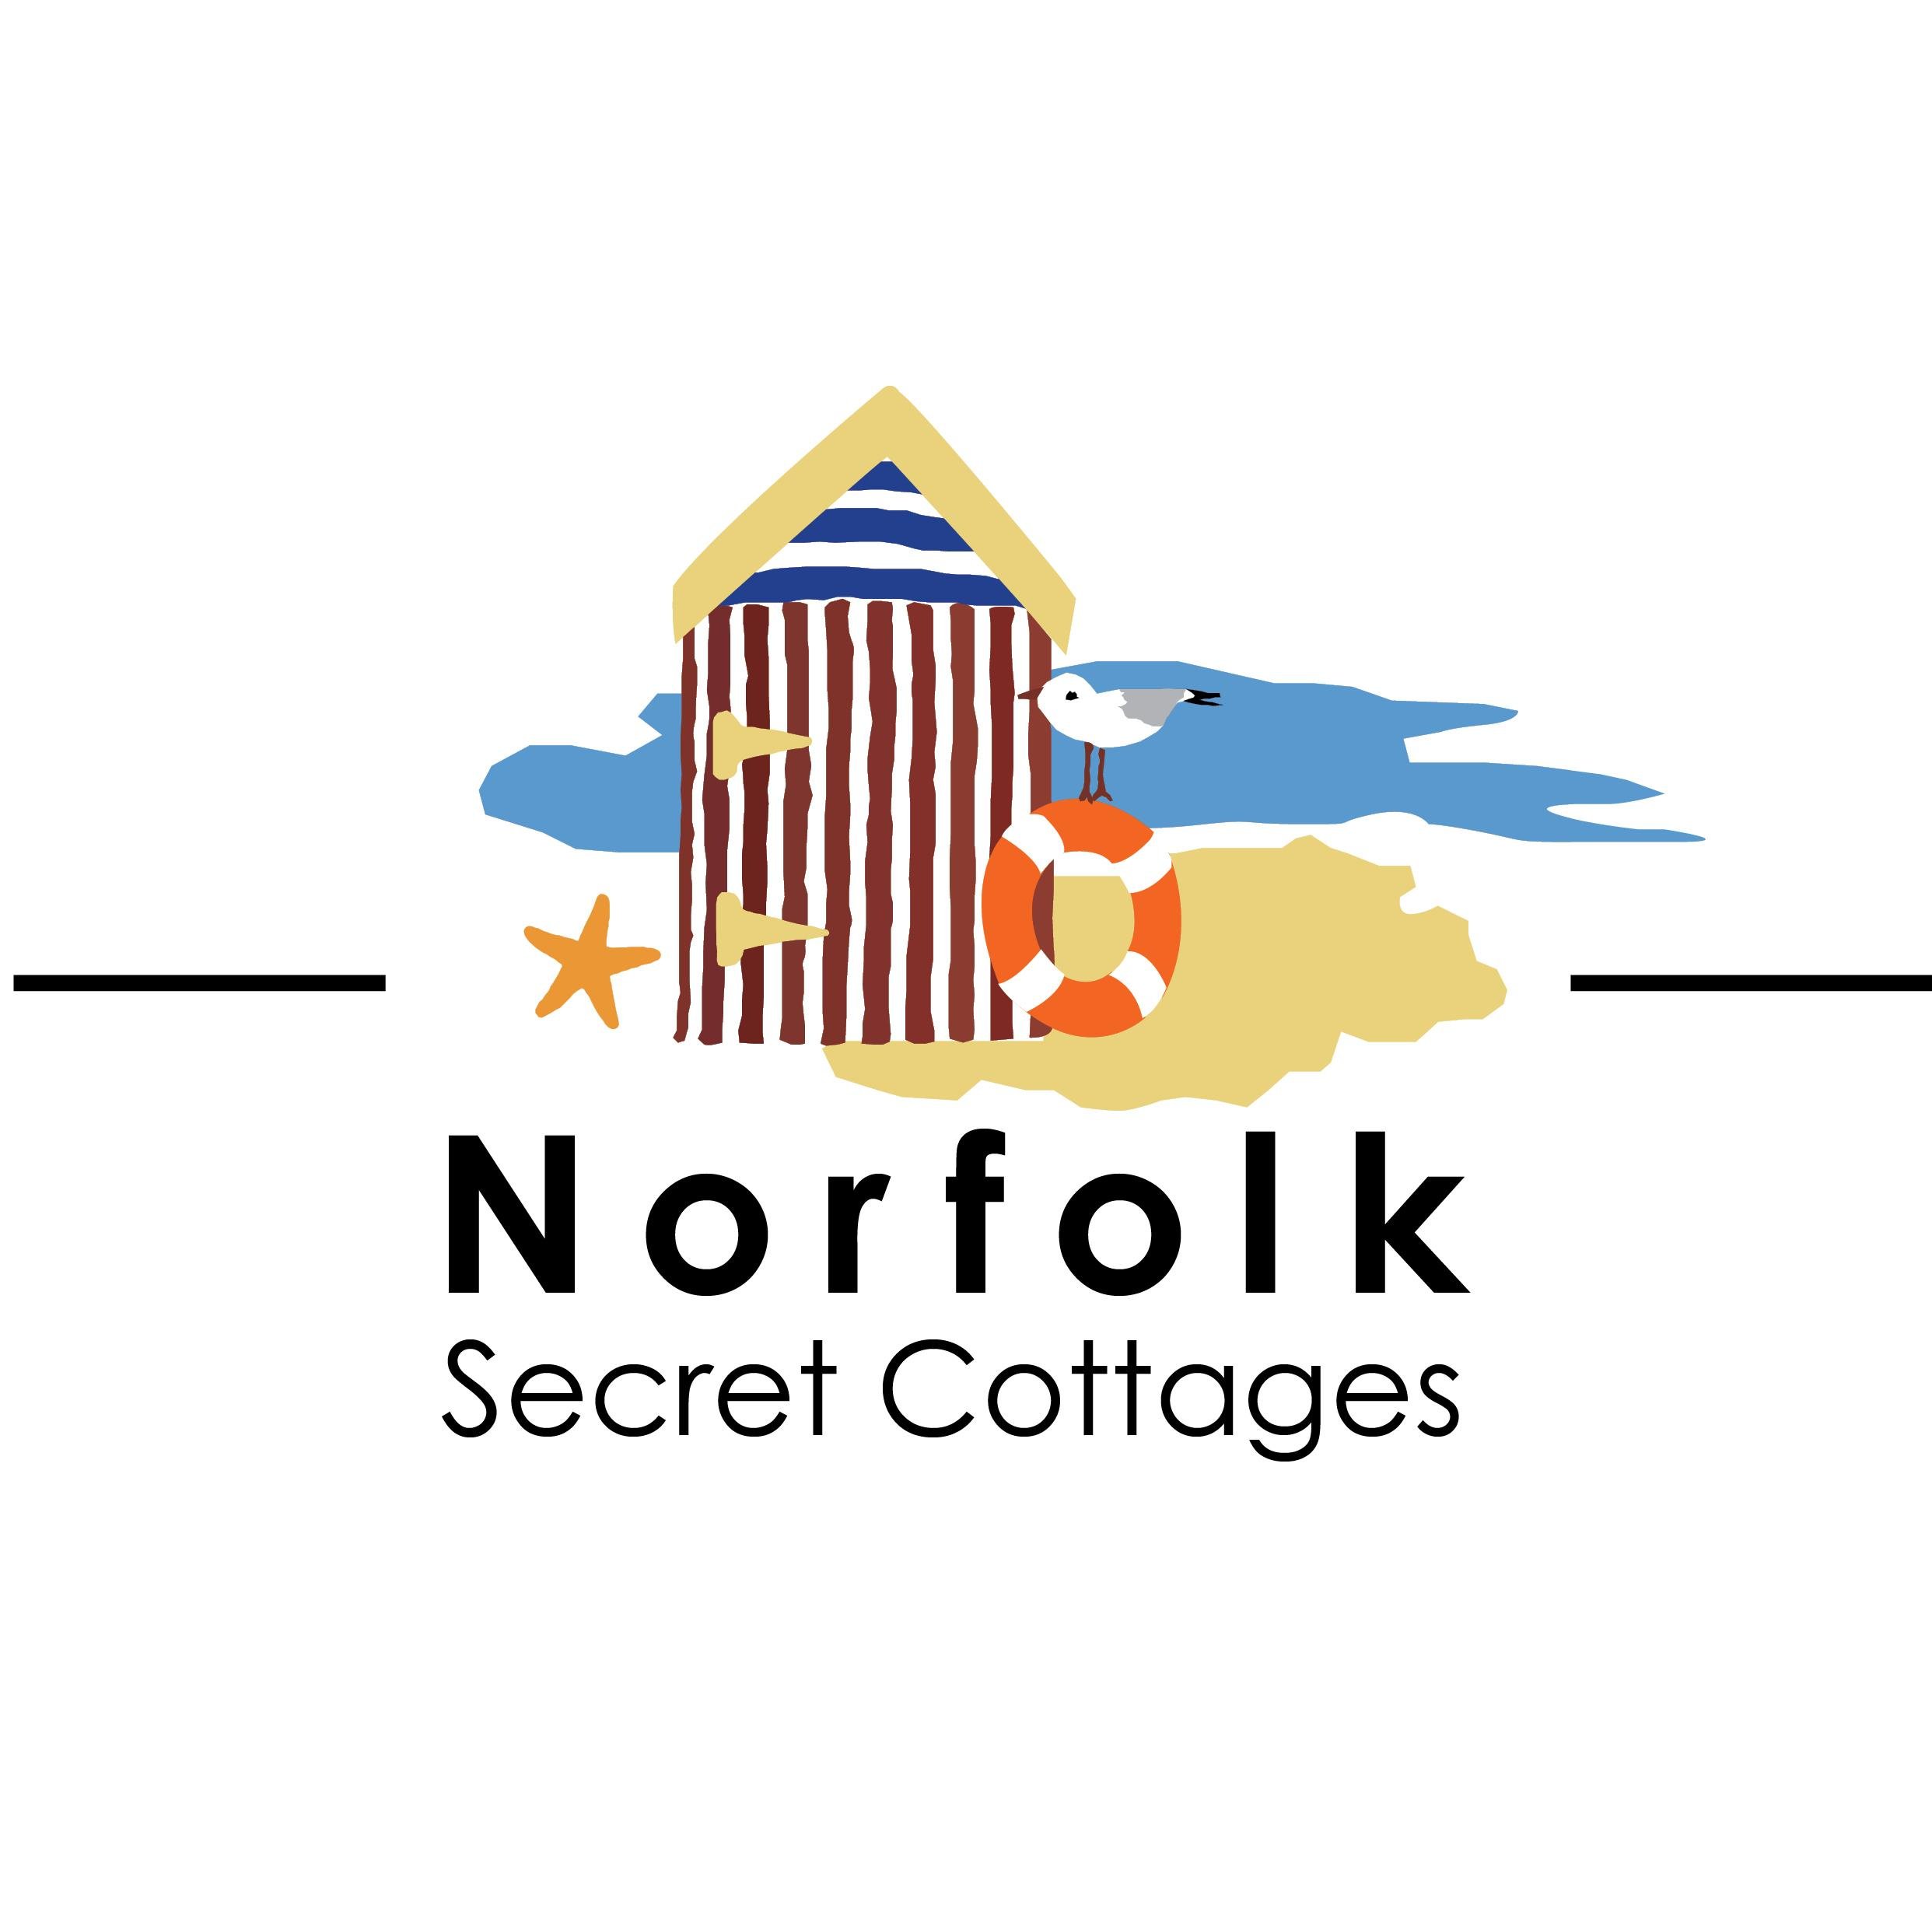 We own and let two award winning luxury holiday cottages situated in Brancaster and Wells-next-the-Sea. Experience Norfolk in Style!